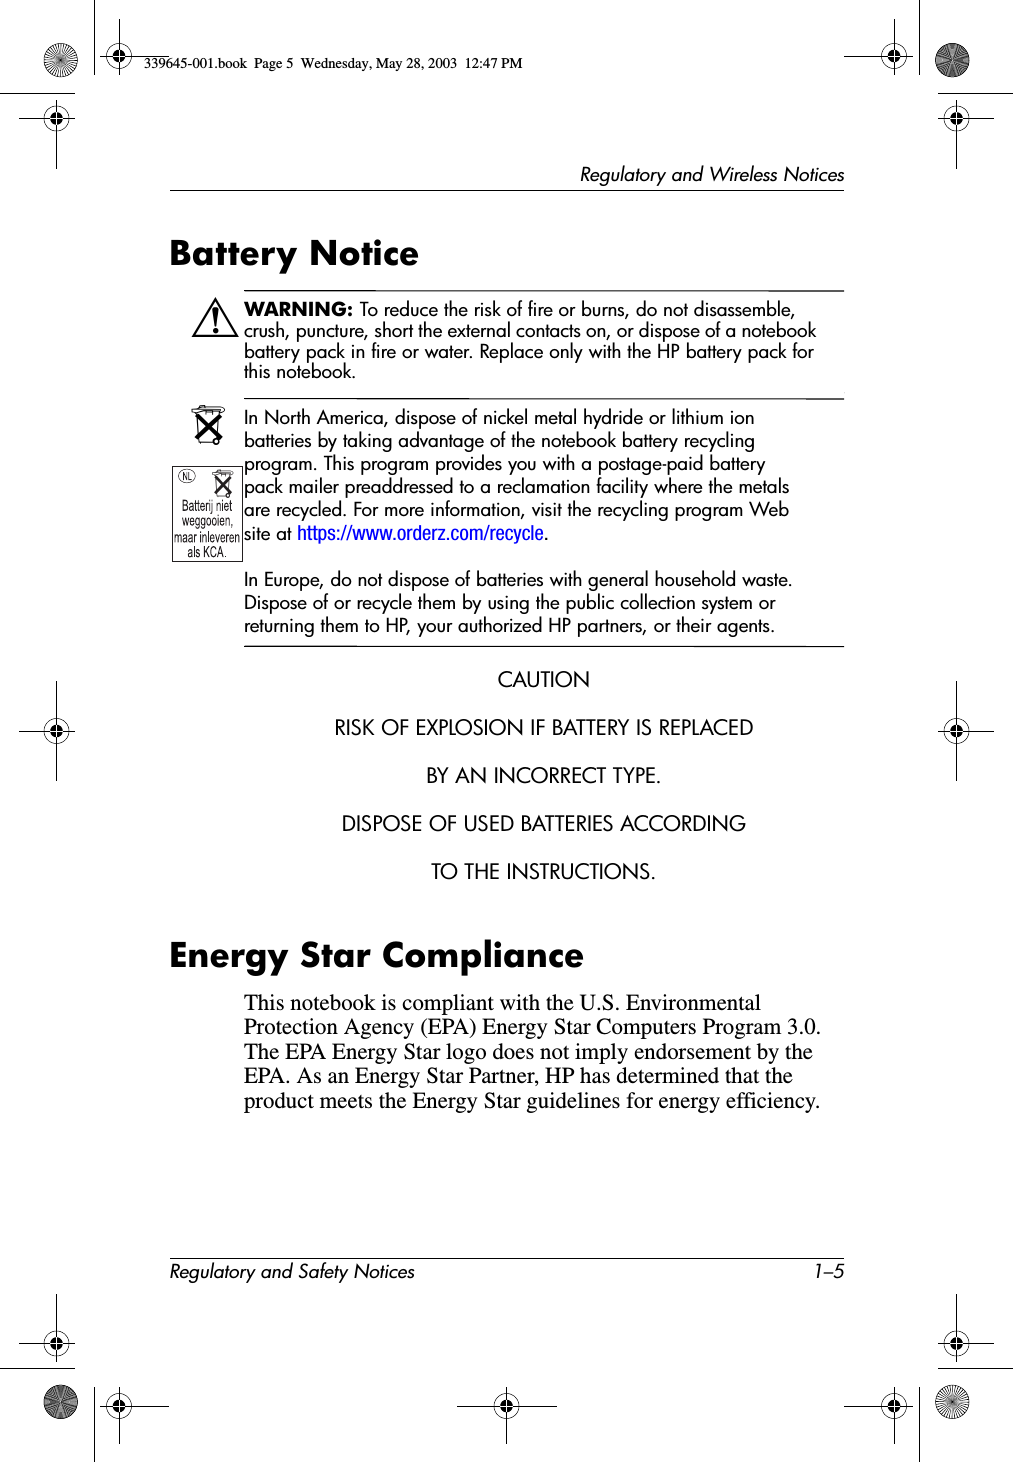 Regulatory and Wireless NoticesRegulatory and Safety Notices 1–5Battery NoticeÅWARNING: To reduce the risk of fire or burns, do not disassemble, crush, puncture, short the external contacts on, or dispose of a notebook battery pack in fire or water. Replace only with the HP battery pack for this notebook.NIn North America, dispose of nickel metal hydride or lithium ion batteries by taking advantage of the notebook battery recycling program. This program provides you with a postage-paid battery pack mailer preaddressed to a reclamation facility where the metals are recycled. For more information, visit the recycling program Web site at https://www.orderz.com/recycle.In Europe, do not dispose of batteries with general household waste. Dispose of or recycle them by using the public collection system or returning them to HP, your authorized HP partners, or their agents.CAUTIONRISK OF EXPLOSION IF BATTERY IS REPLACEDBY AN INCORRECT TYPE.DISPOSE OF USED BATTERIES ACCORDINGTO THE INSTRUCTIONS.Energy Star ComplianceThis notebook is compliant with the U.S. Environmental Protection Agency (EPA) Energy Star Computers Program 3.0. The EPA Energy Star logo does not imply endorsement by the EPA. As an Energy Star Partner, HP has determined that the product meets the Energy Star guidelines for energy efficiency.N339645-001.book  Page 5  Wednesday, May 28, 2003  12:47 PM